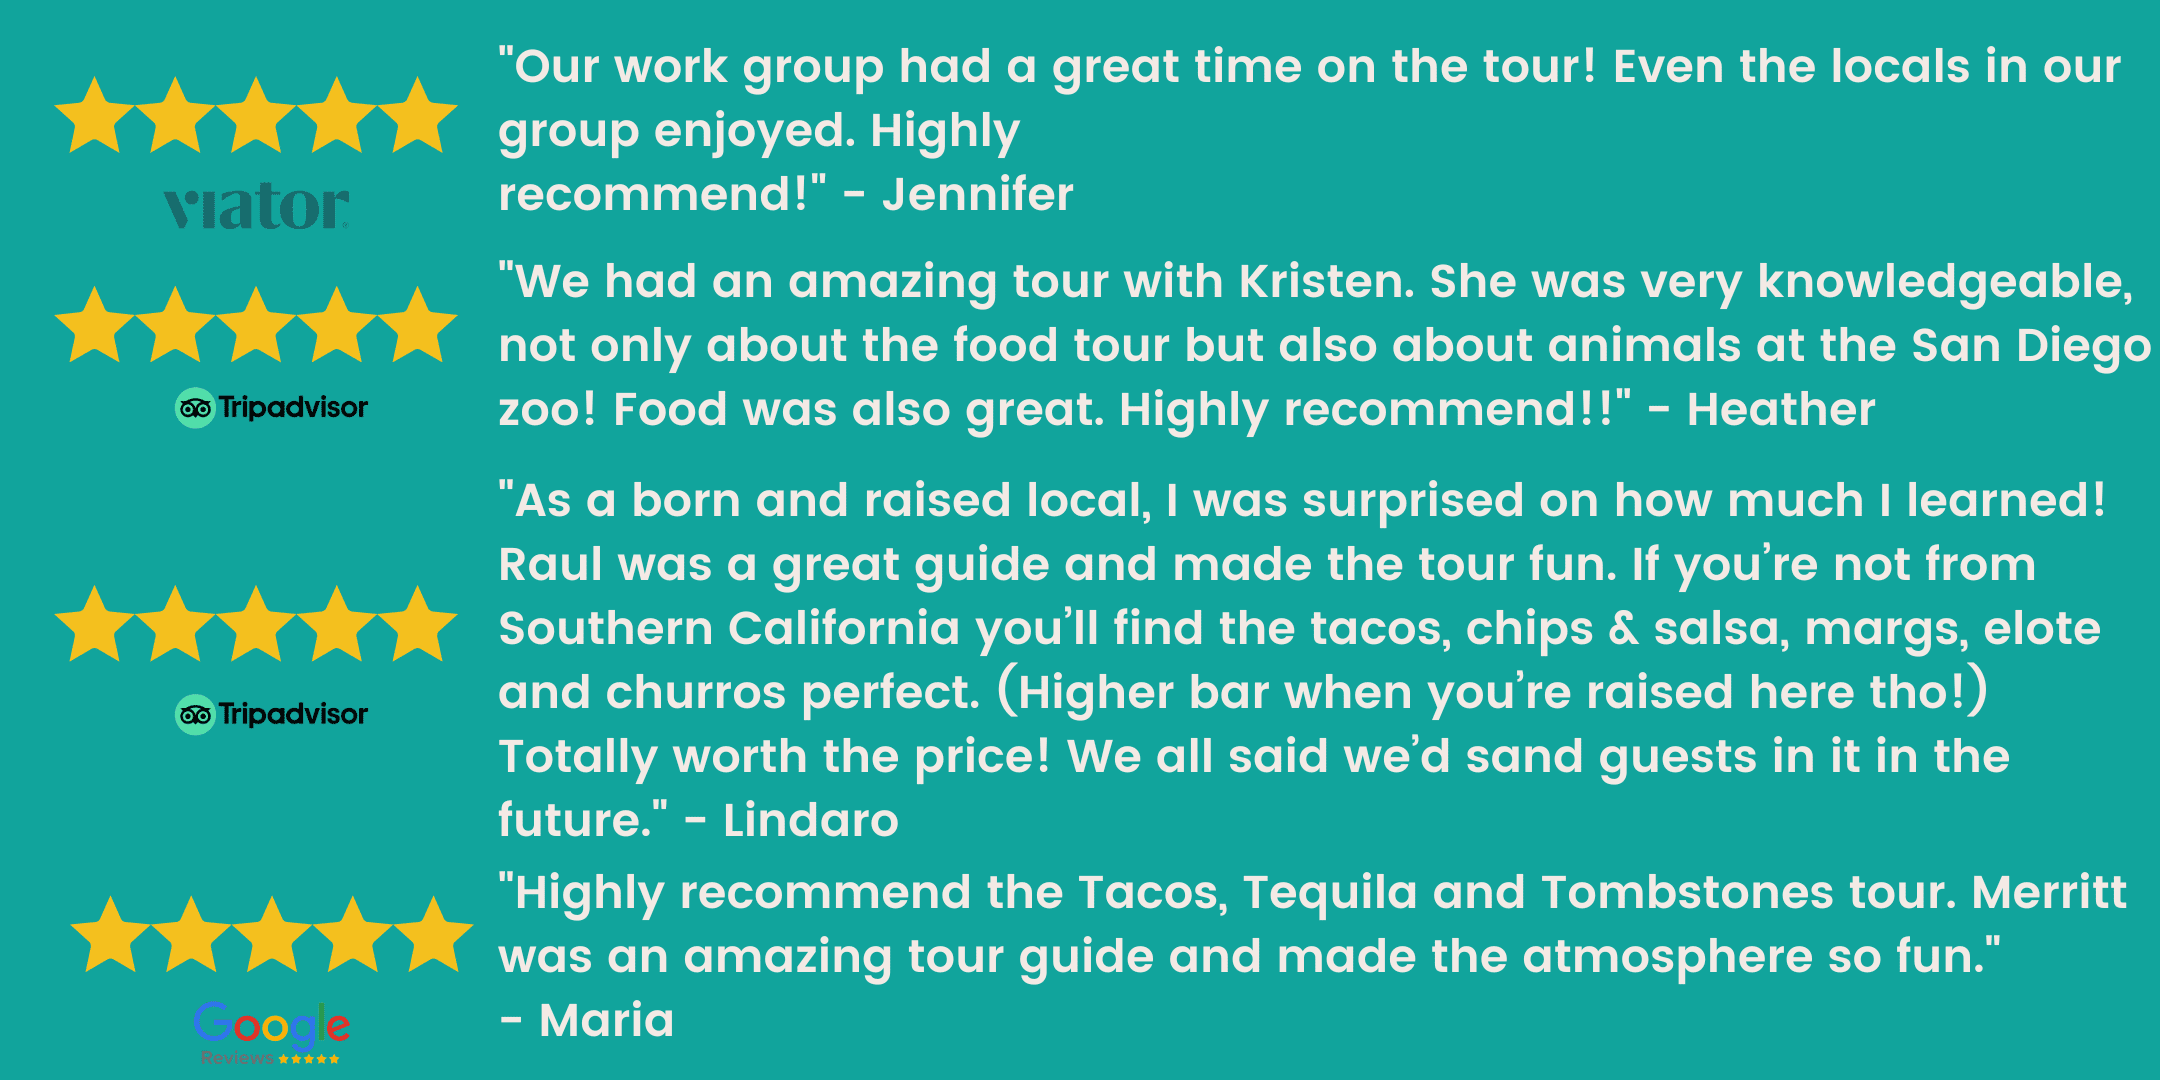 Tequila, Tacos and Tombstones reviews